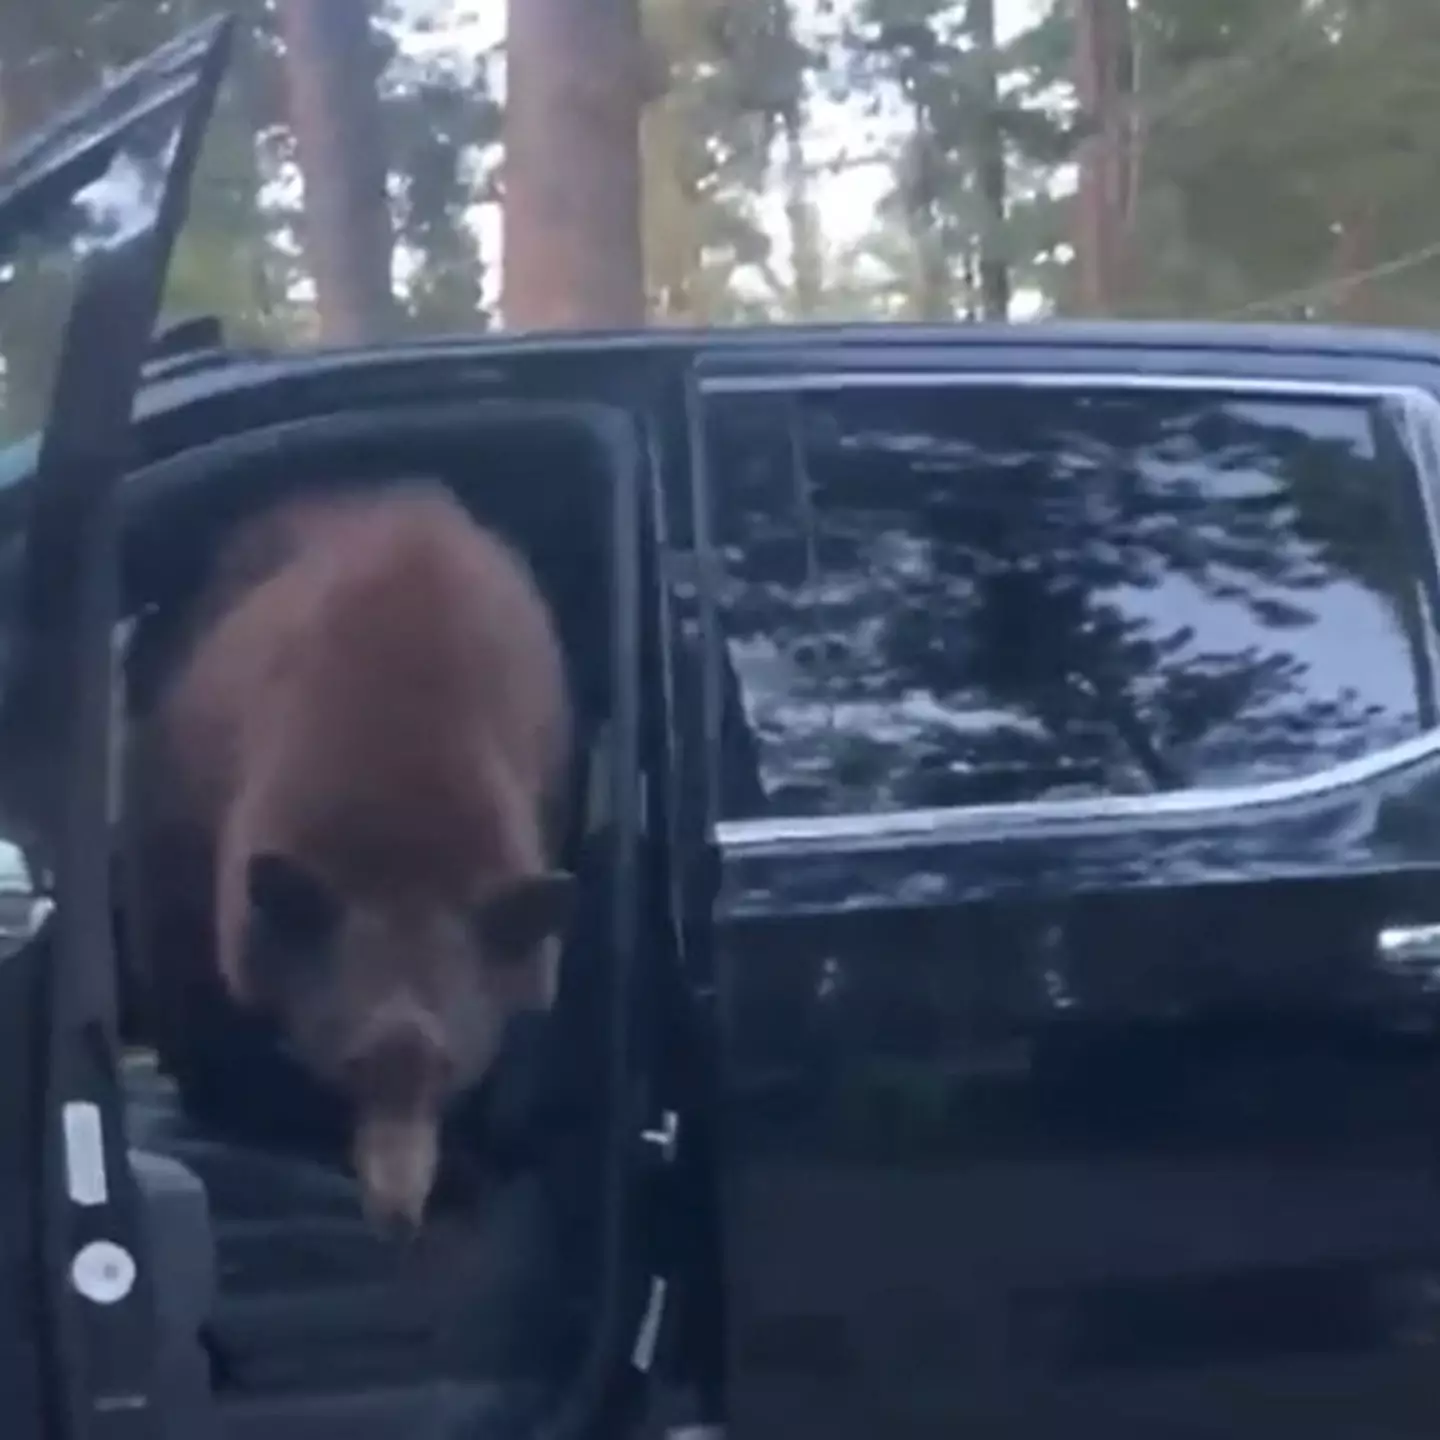 People have been reacting to the woman's decision to confront the bear.